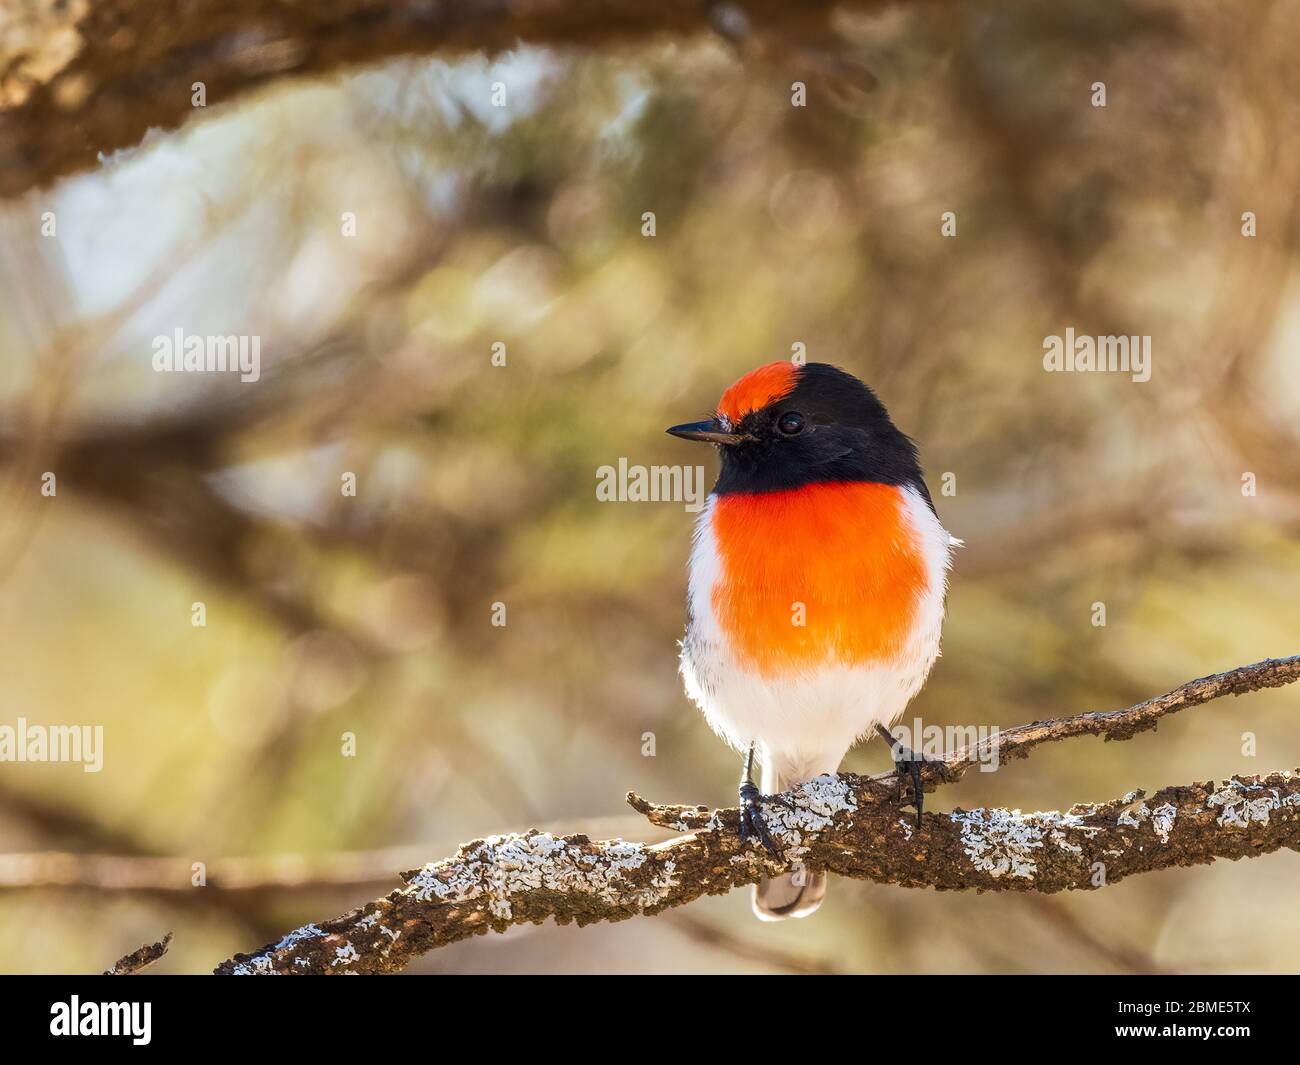 The Red-capped Robin (Petroica goodenovi) is the smallest red robin. The male Red-capped Robin has a unique red cap. Stock Photo